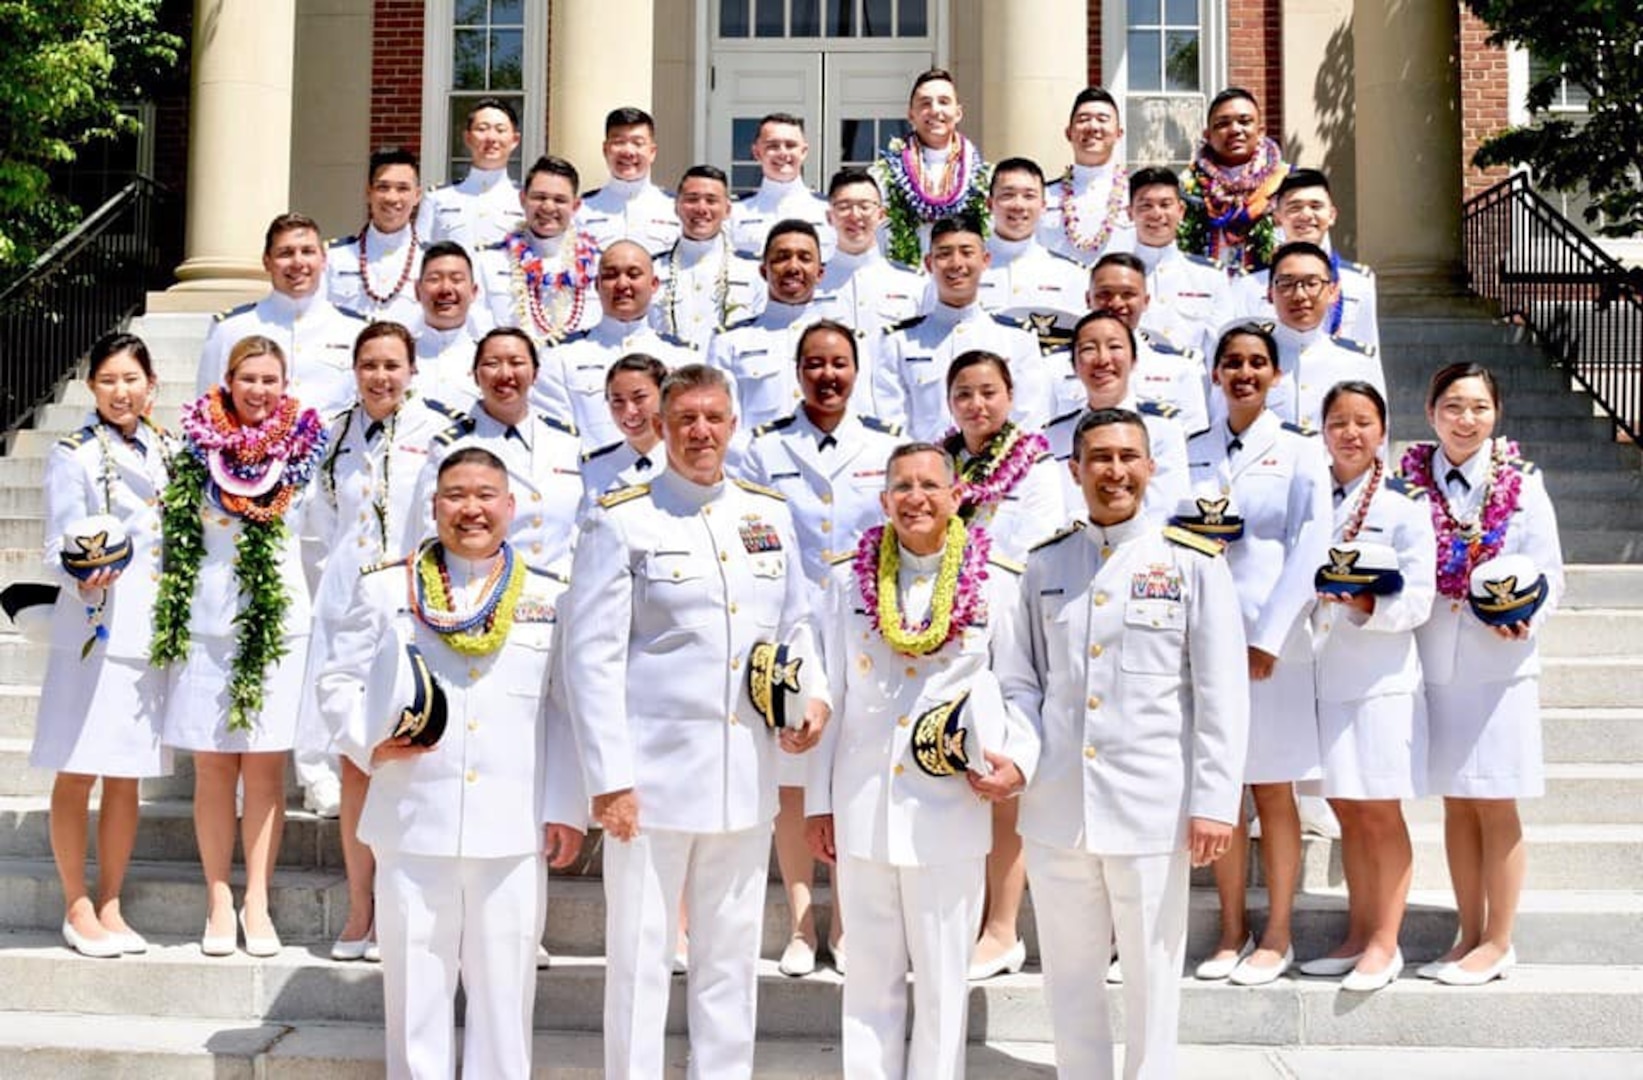 The 34 brand new Ensigns, pictured here, represent the largest group of Asian American and Pacific Islanders to graduate the Coast Guard Academy in May 2019—marking a step towards a more diverse and inclusive workforce. U.S. Coast Guard photo.